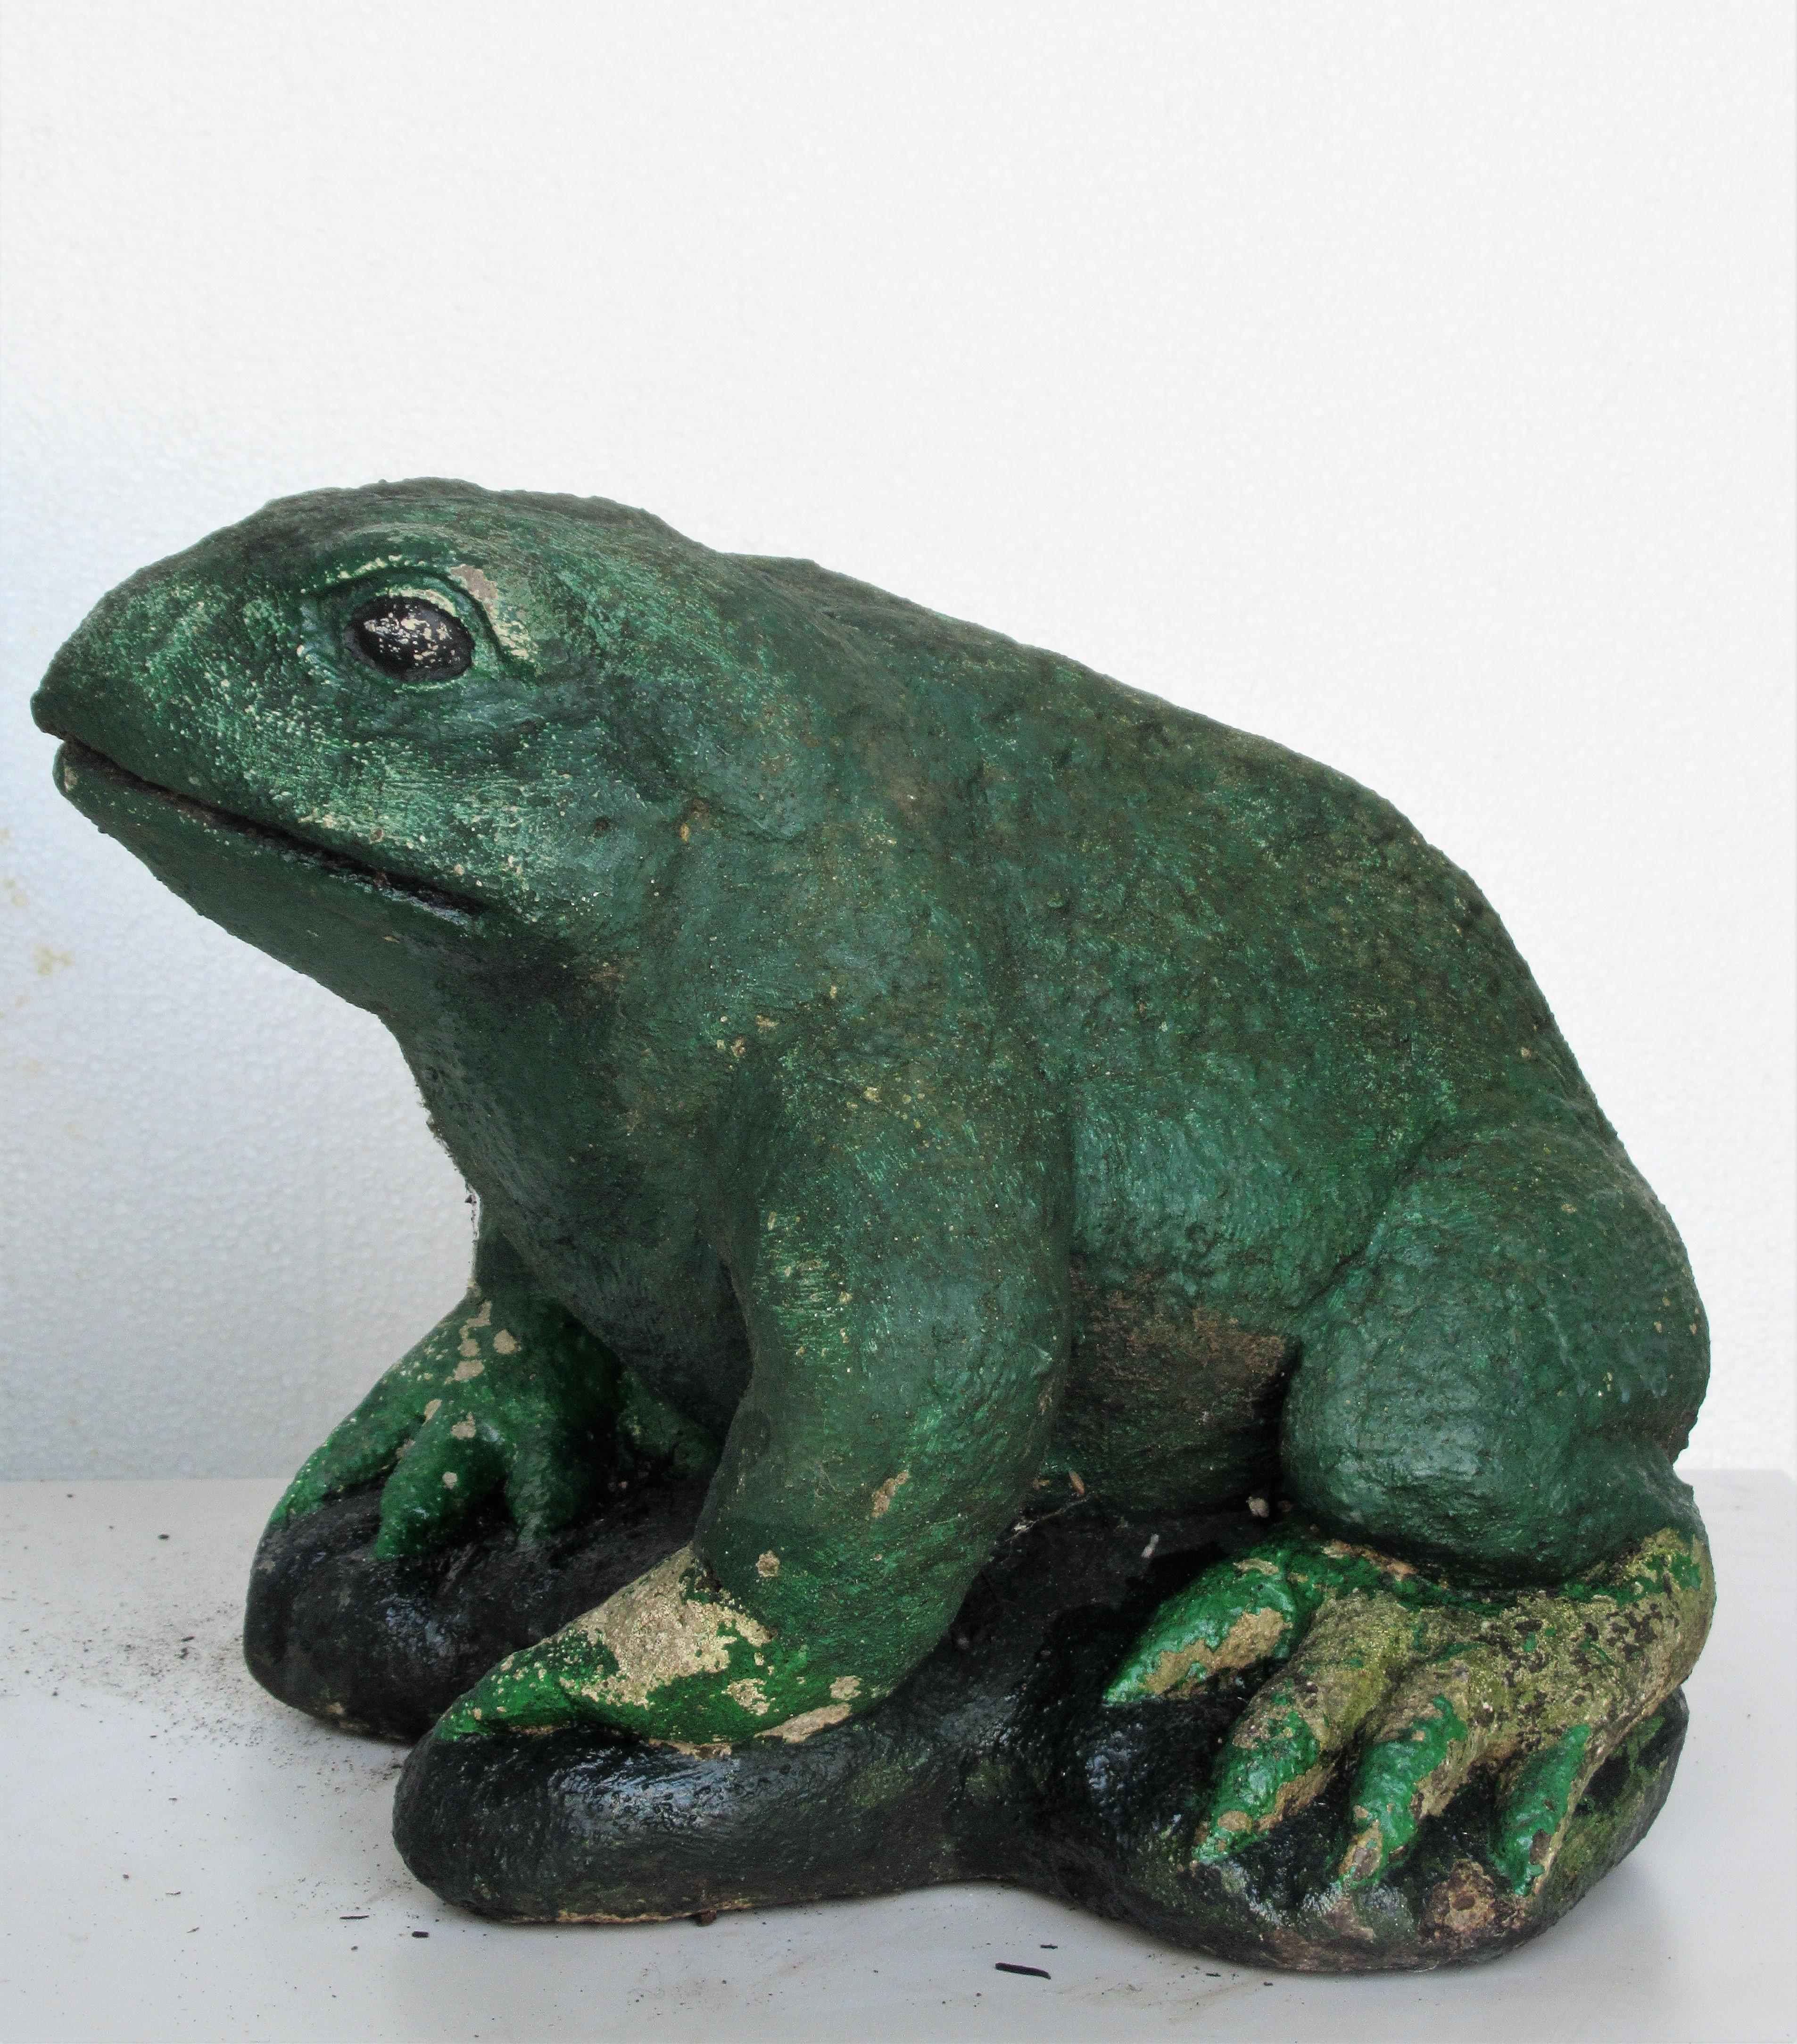  Old Painted Stone Garden Toads 4